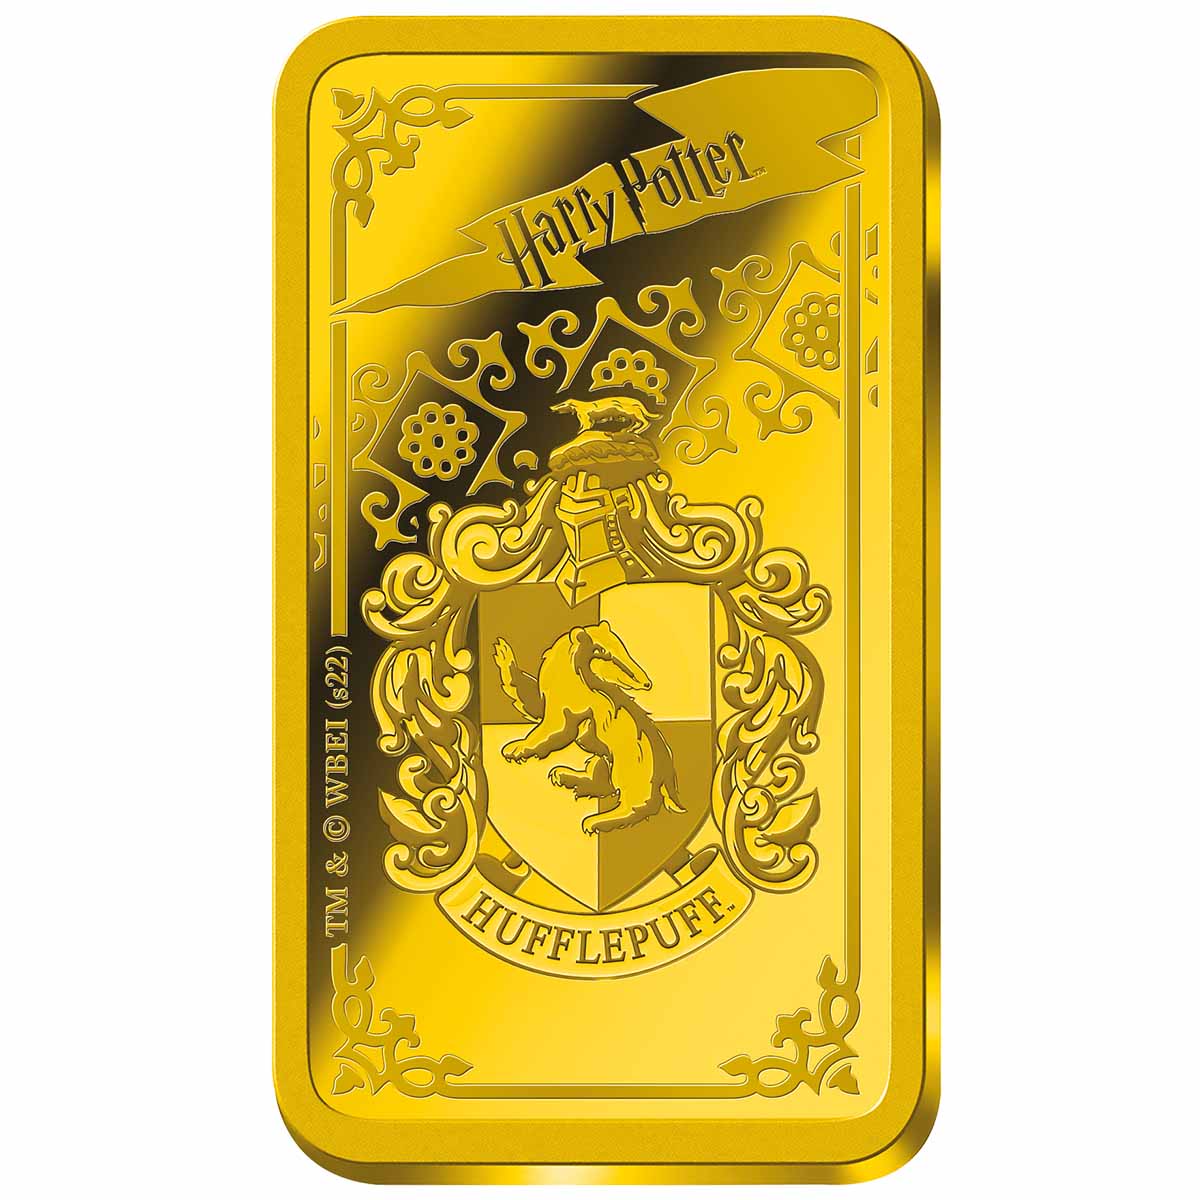 Harry Potter 2022 Hufflepuff $5 0.5g Gold Prooflike Coin